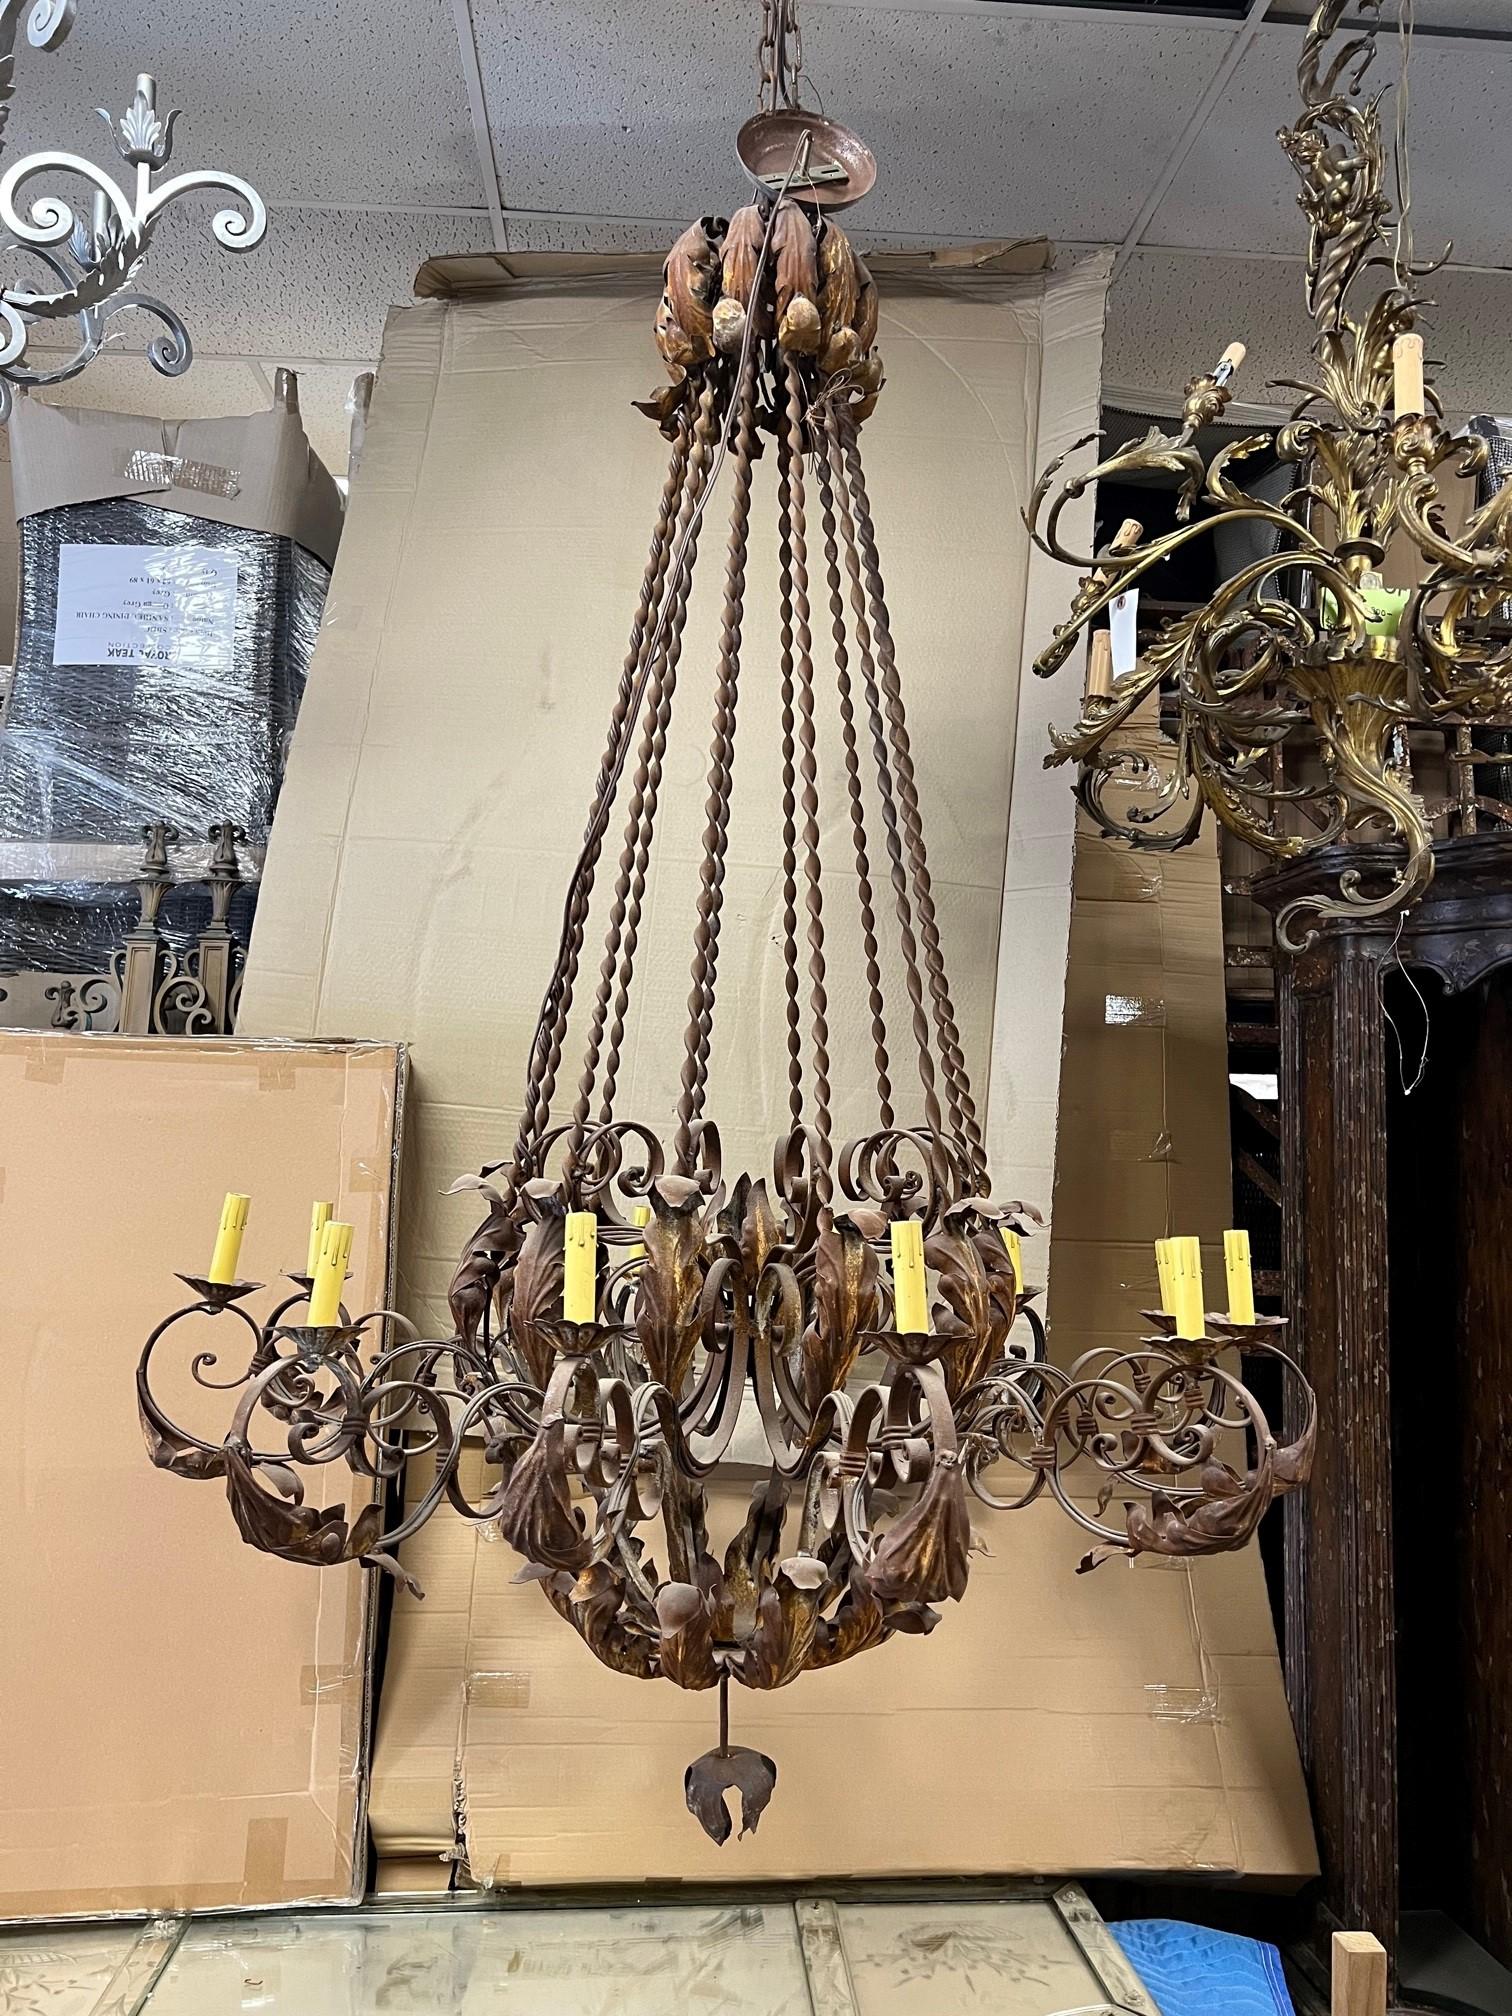 This is a great large iron chandelier with twisted wrought iron rods and acanthus leaves on a rustic chandelier. Handmade with 12 lights, electrified and a great size 4' x 6' and I believe it was made in the USA maybe 20 years ago. It is ready to